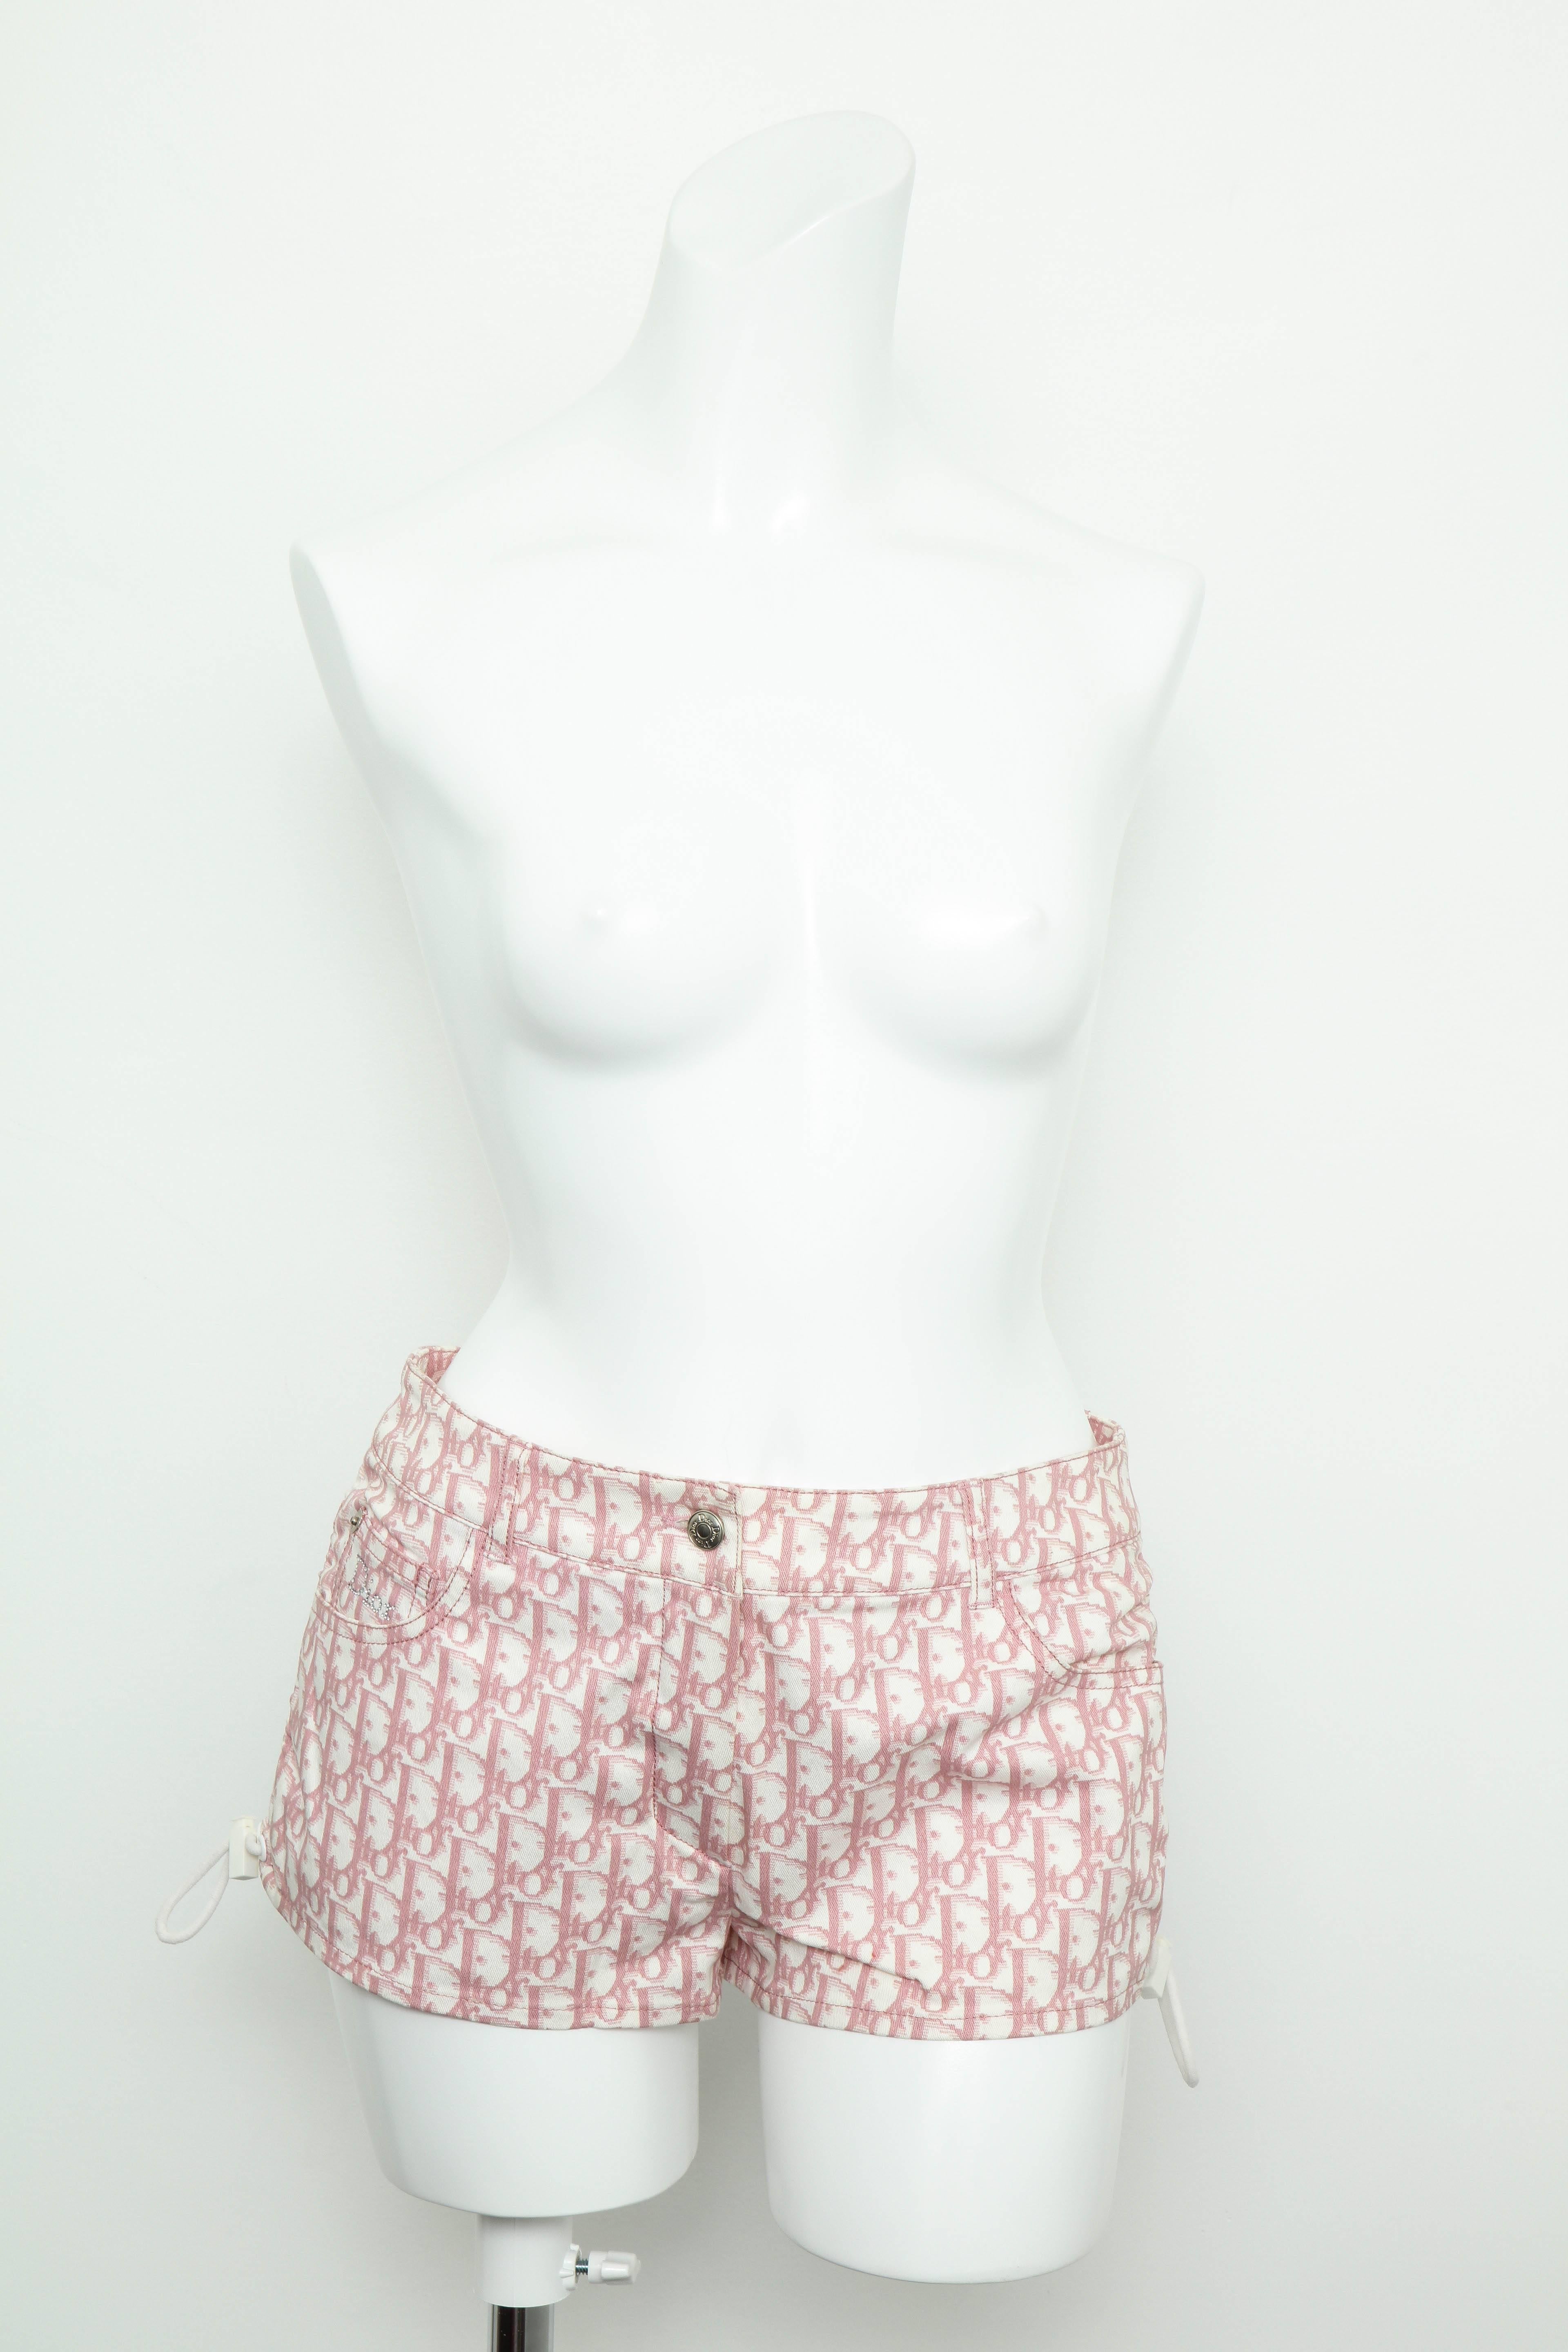 Very rare John Galliano for Christian Dior pink trotter logo shorts.

FR Size 36